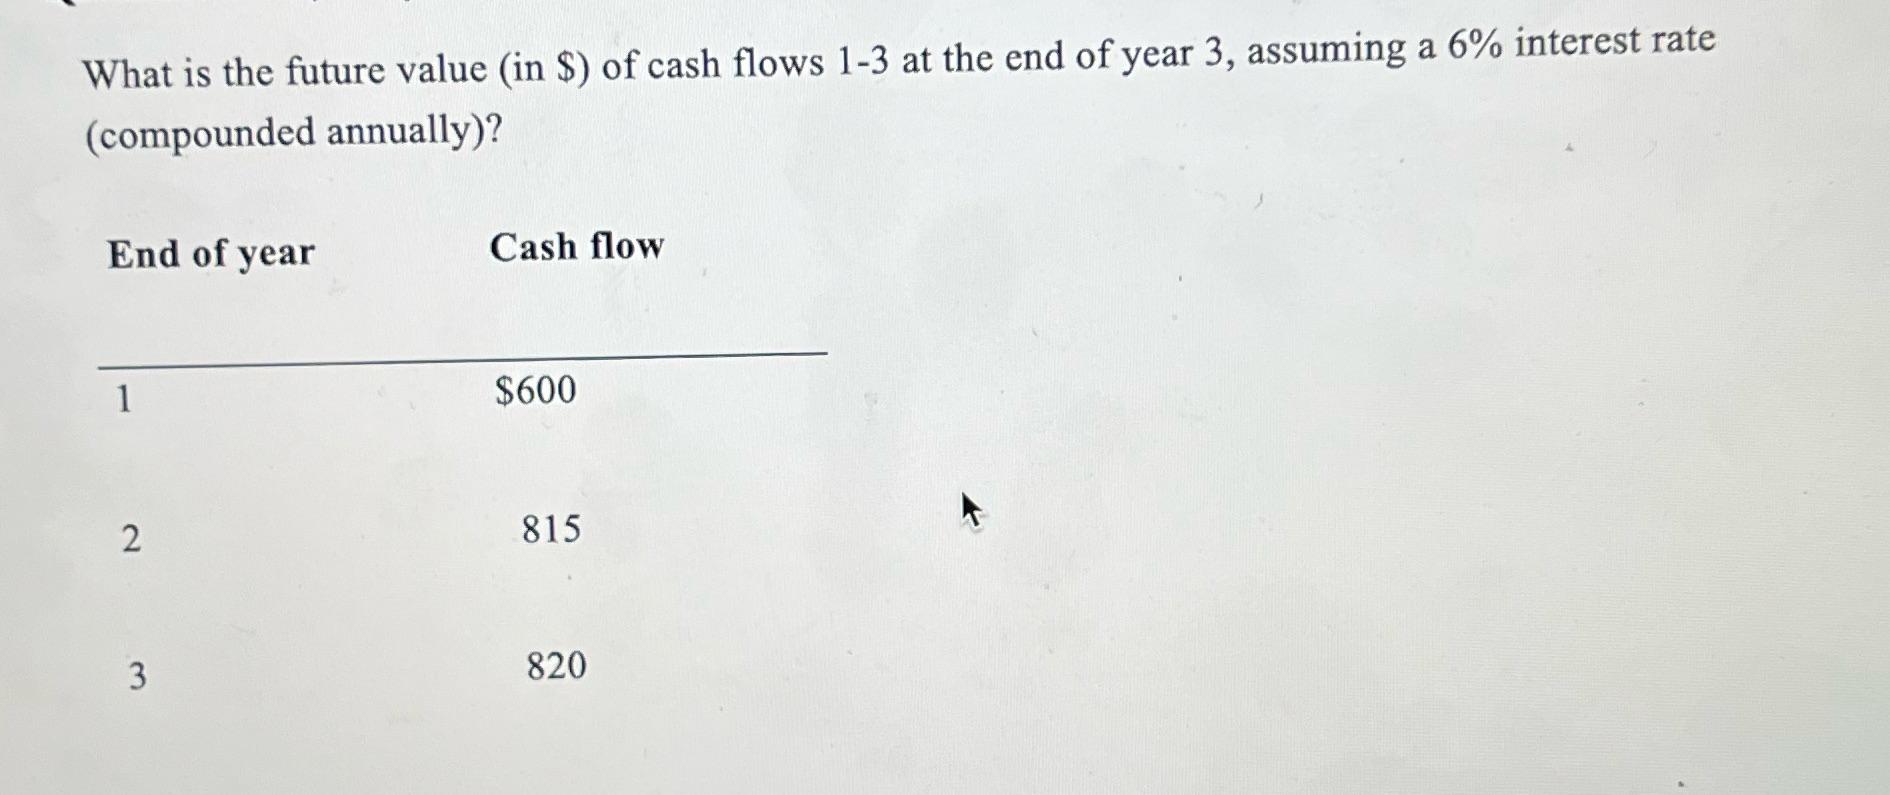 What is the future value (in $) of cash flows 1-3 at the end of year 3, assuming a 6% interest rate